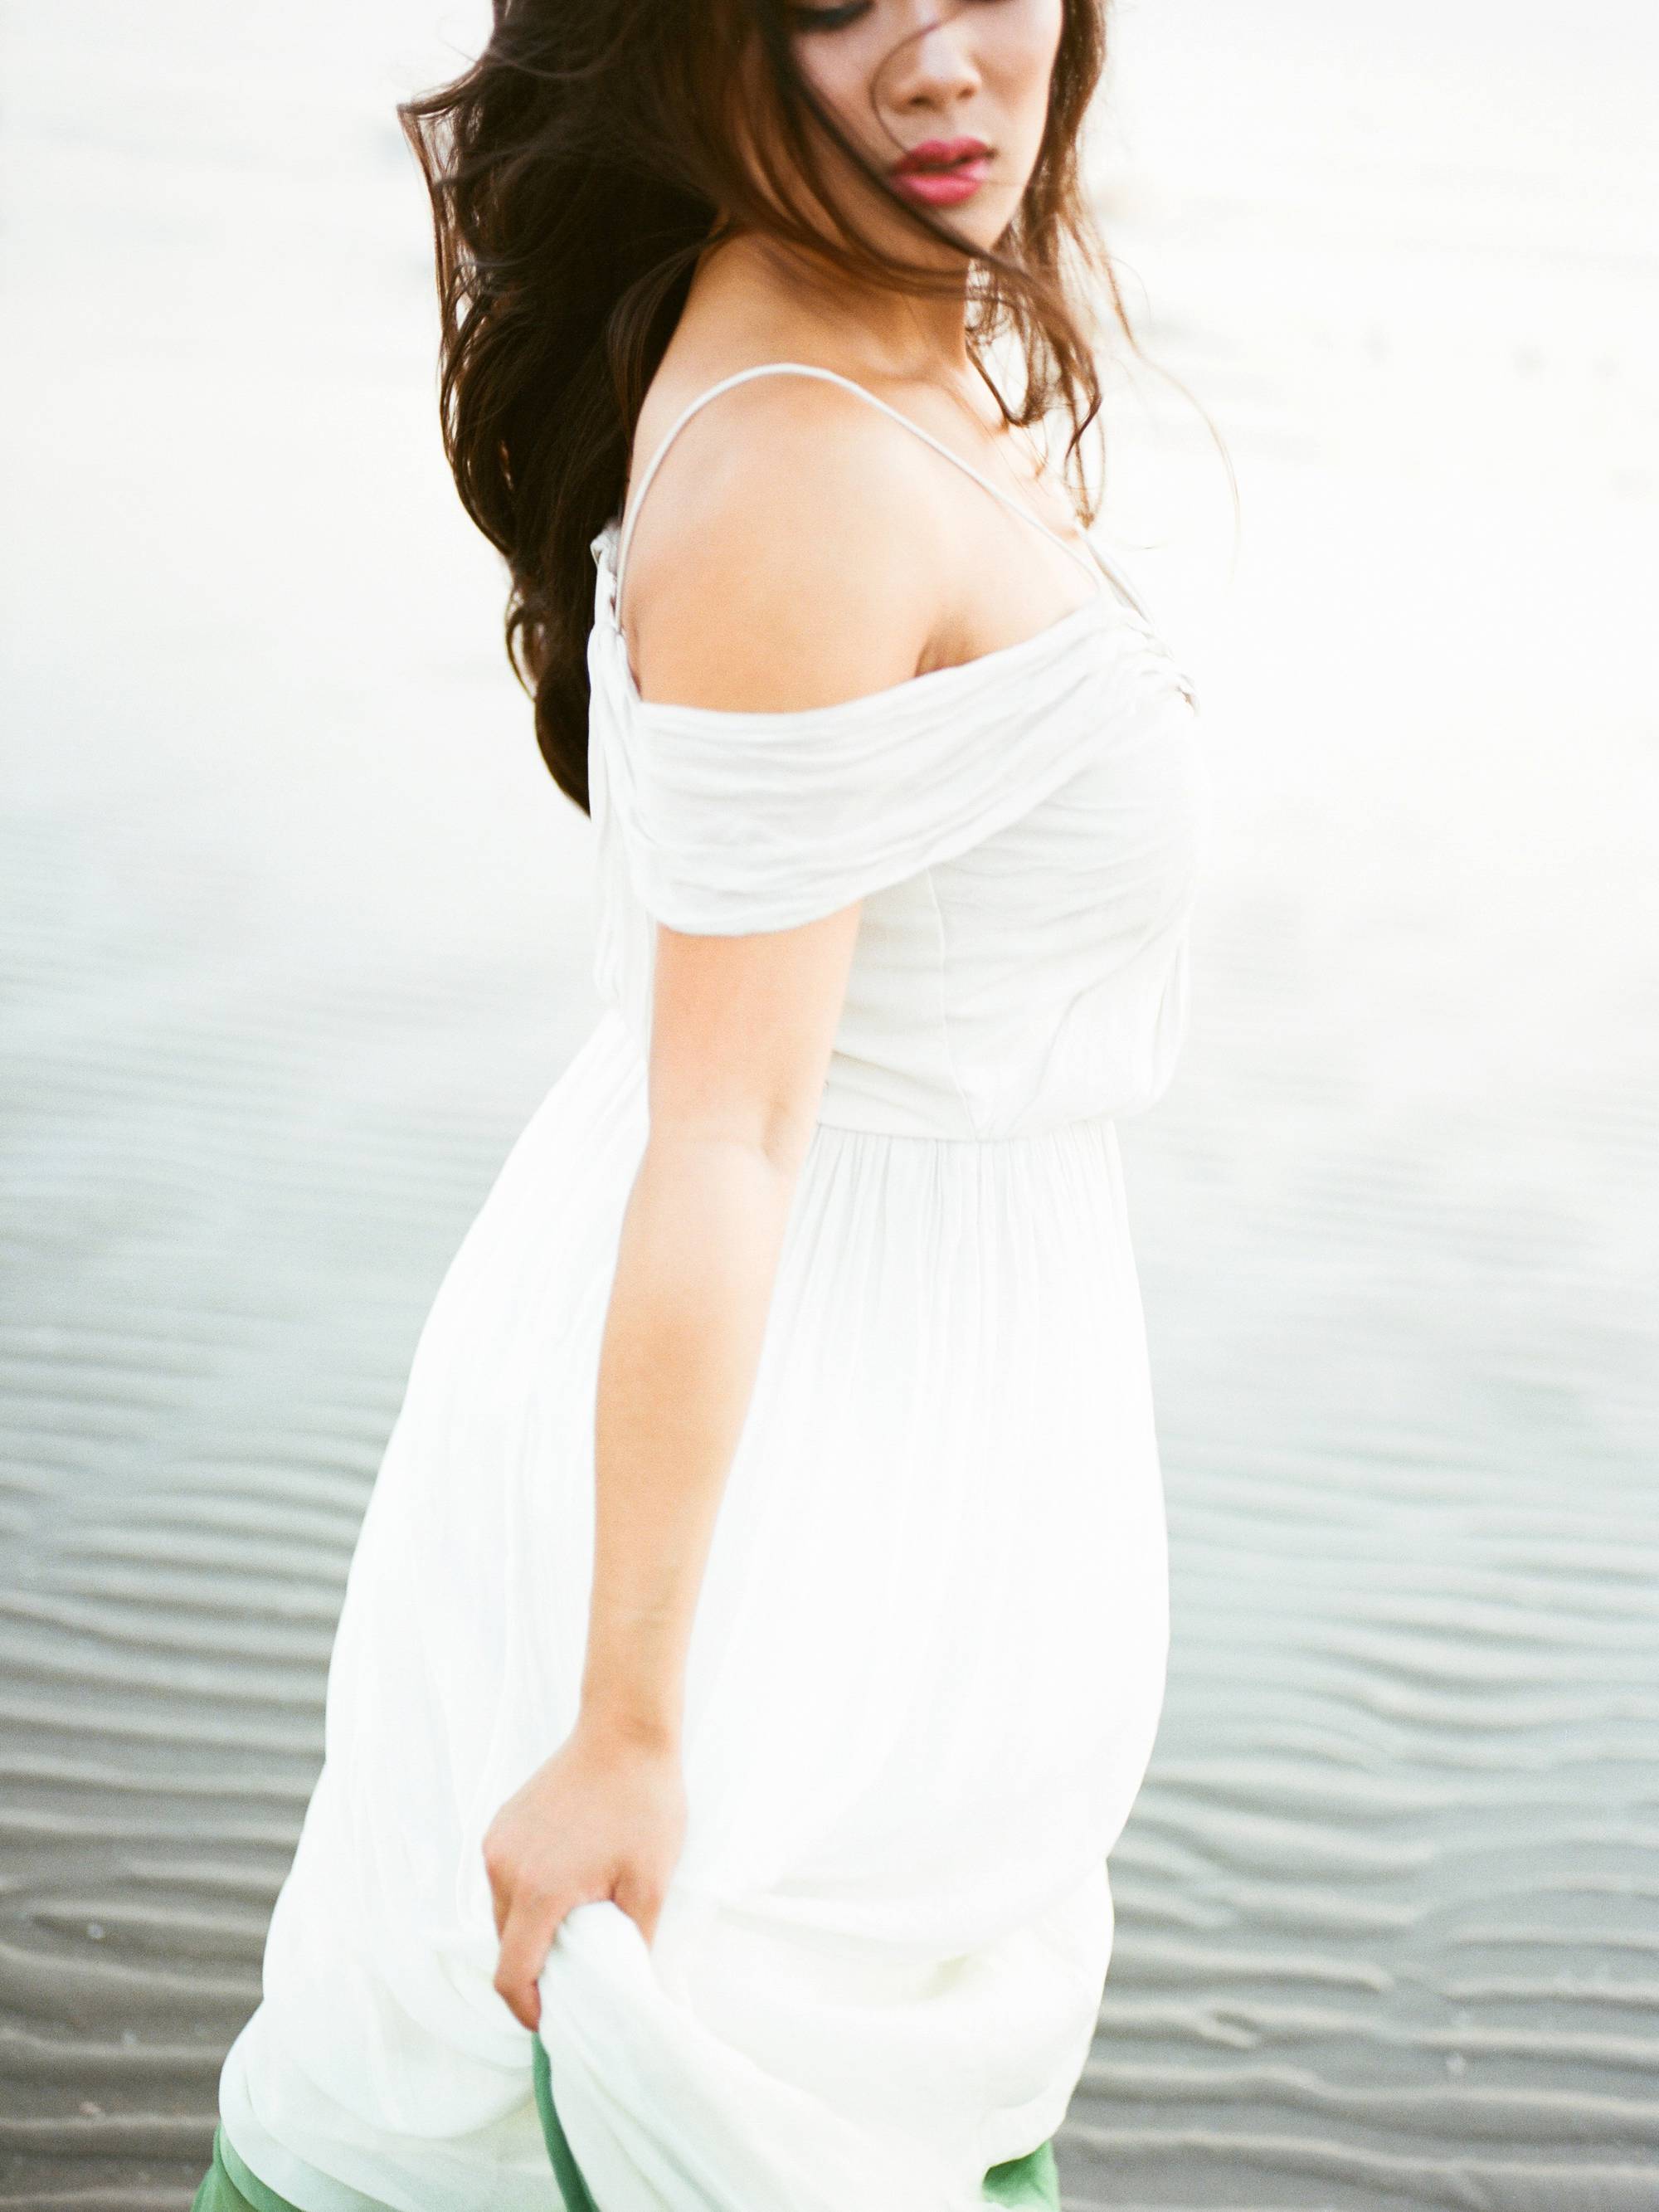 Fine art film photography for beach weddings in the Netherlands - Bridal portrait